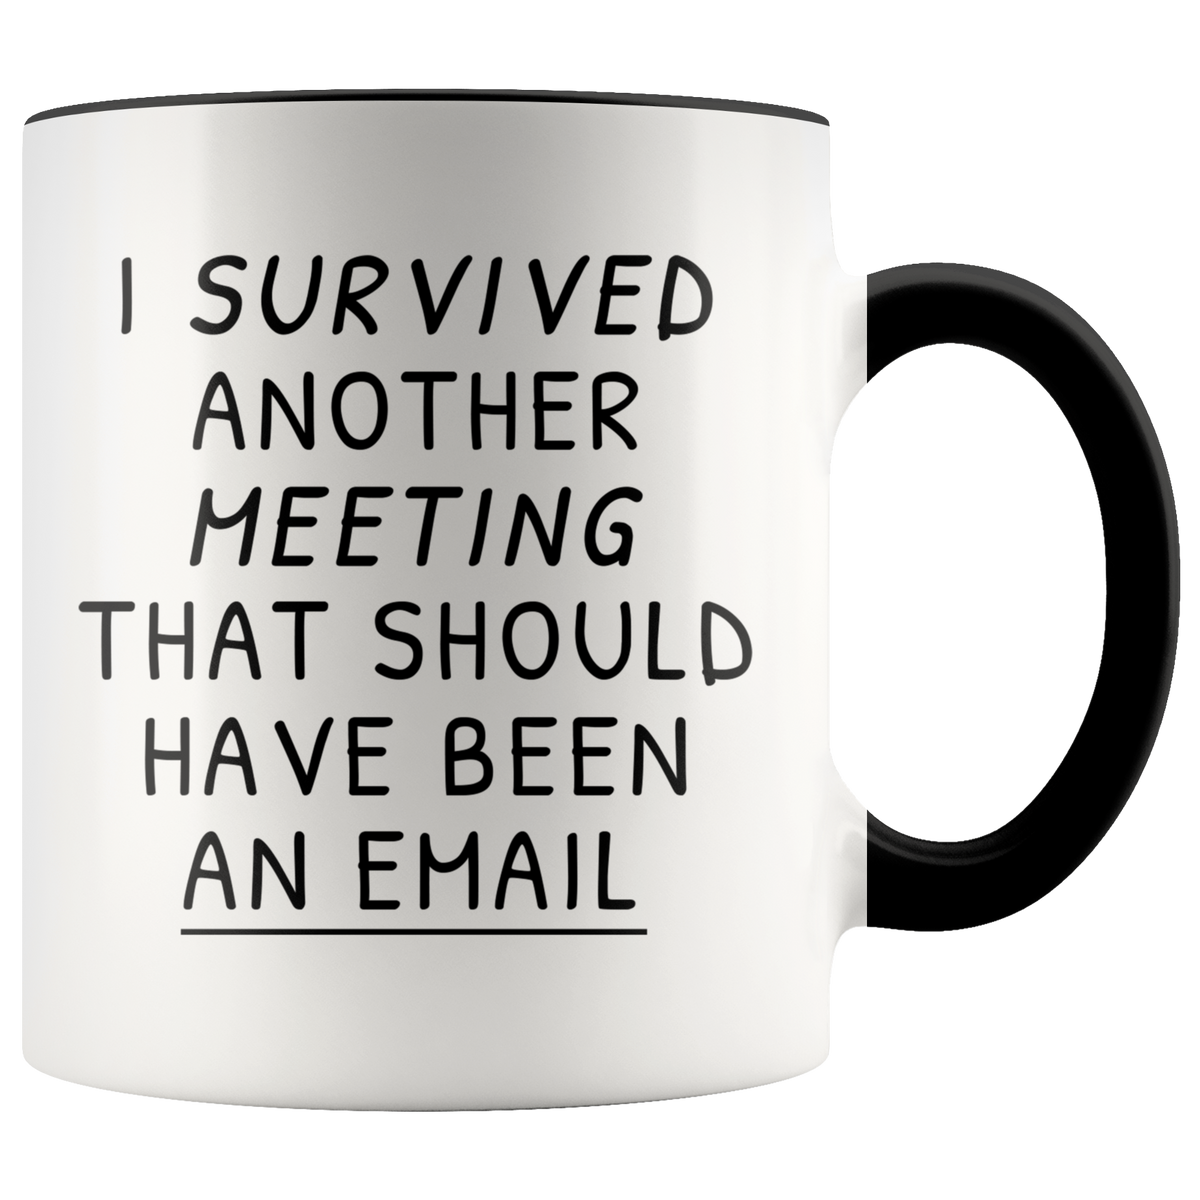 Funny Work Mug Office Mug Gift For Coworker, Boss - I Survived Another Meeting That Should Have Been An Email Accent Coffee Mug 11oz